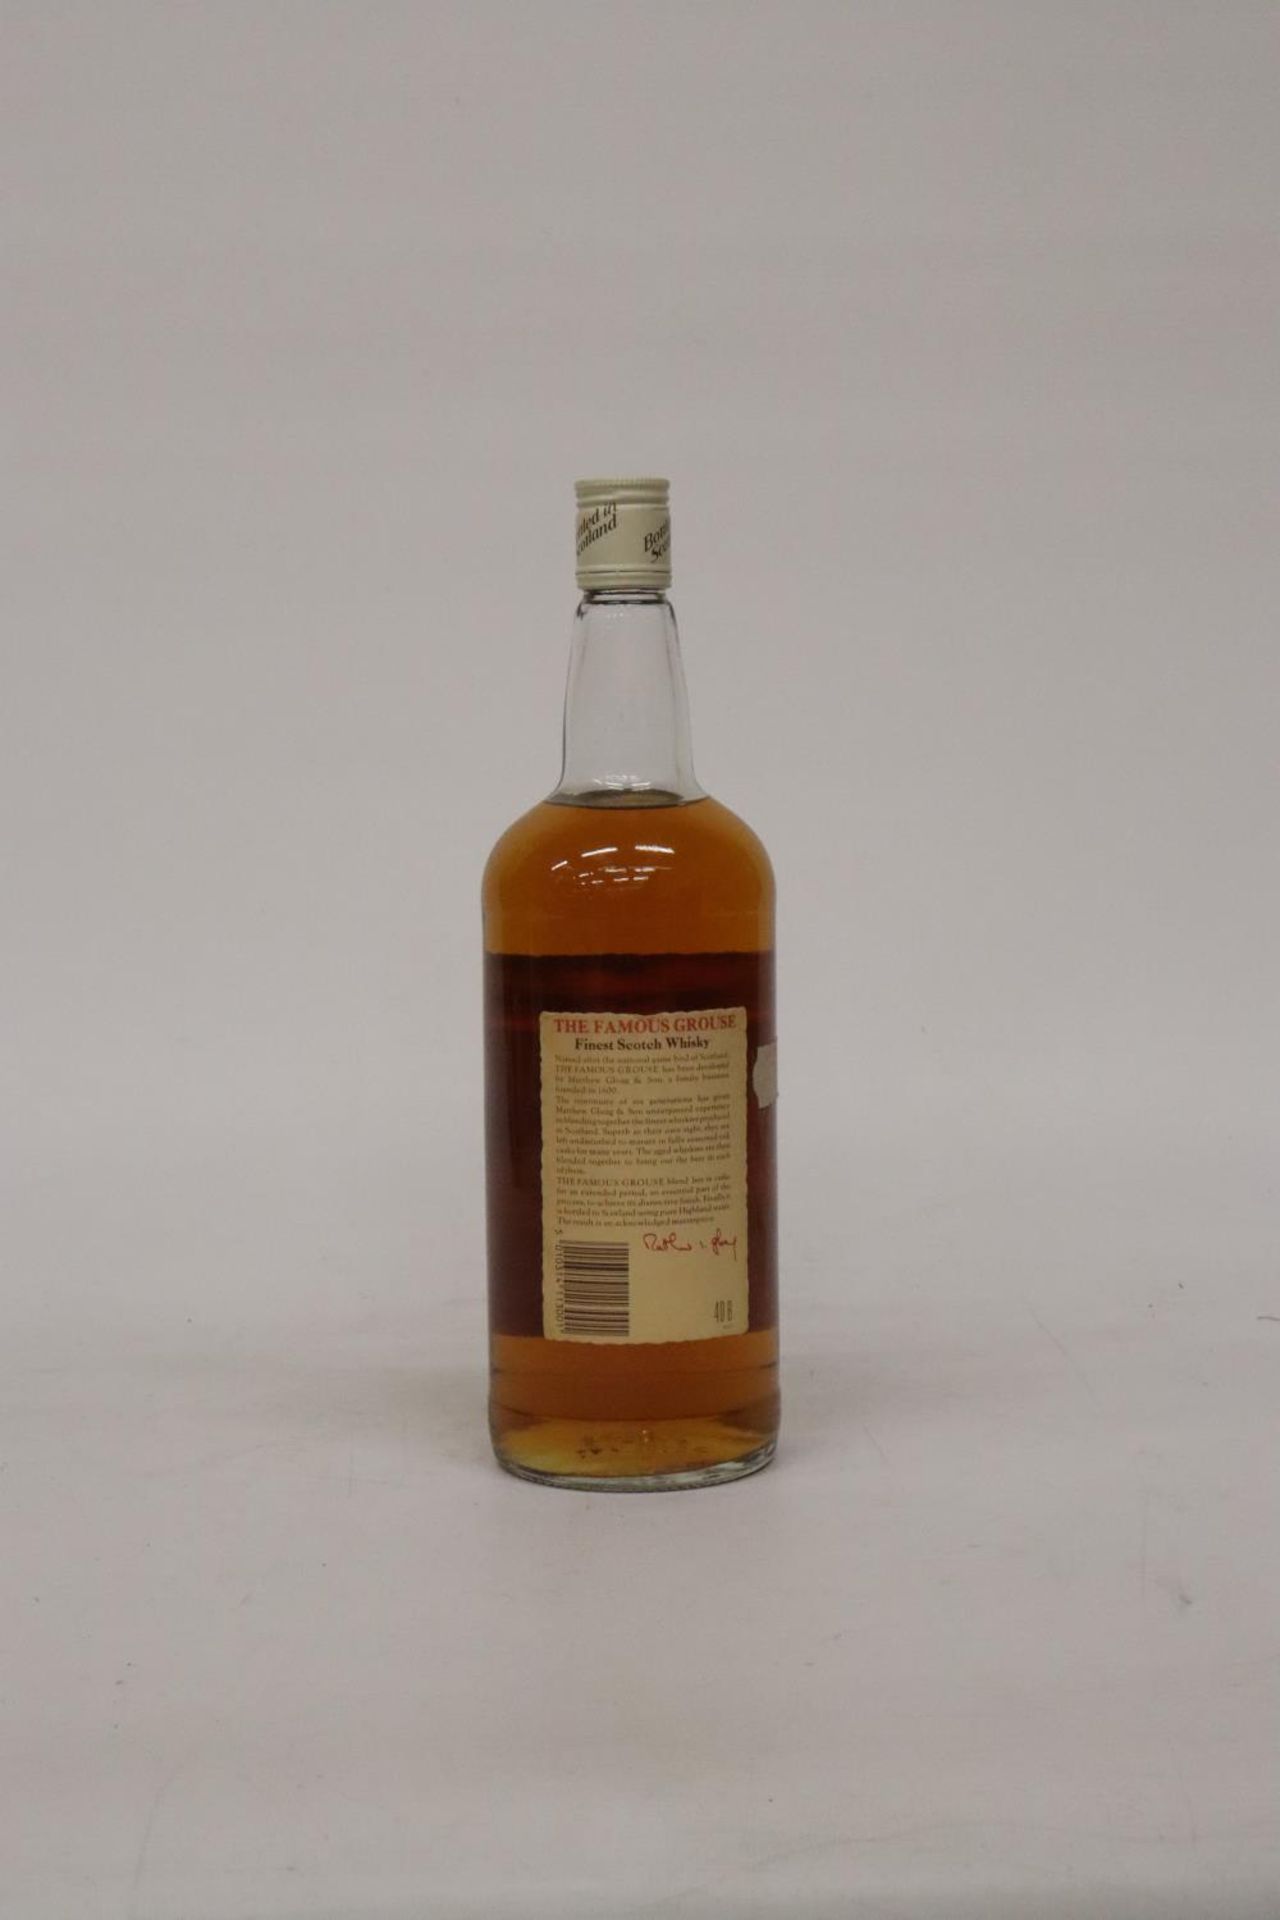 A 1.13CL BOTTLE OF FAMOUS GROUSE FINEST SCOTCH WHISKY - Image 2 of 3